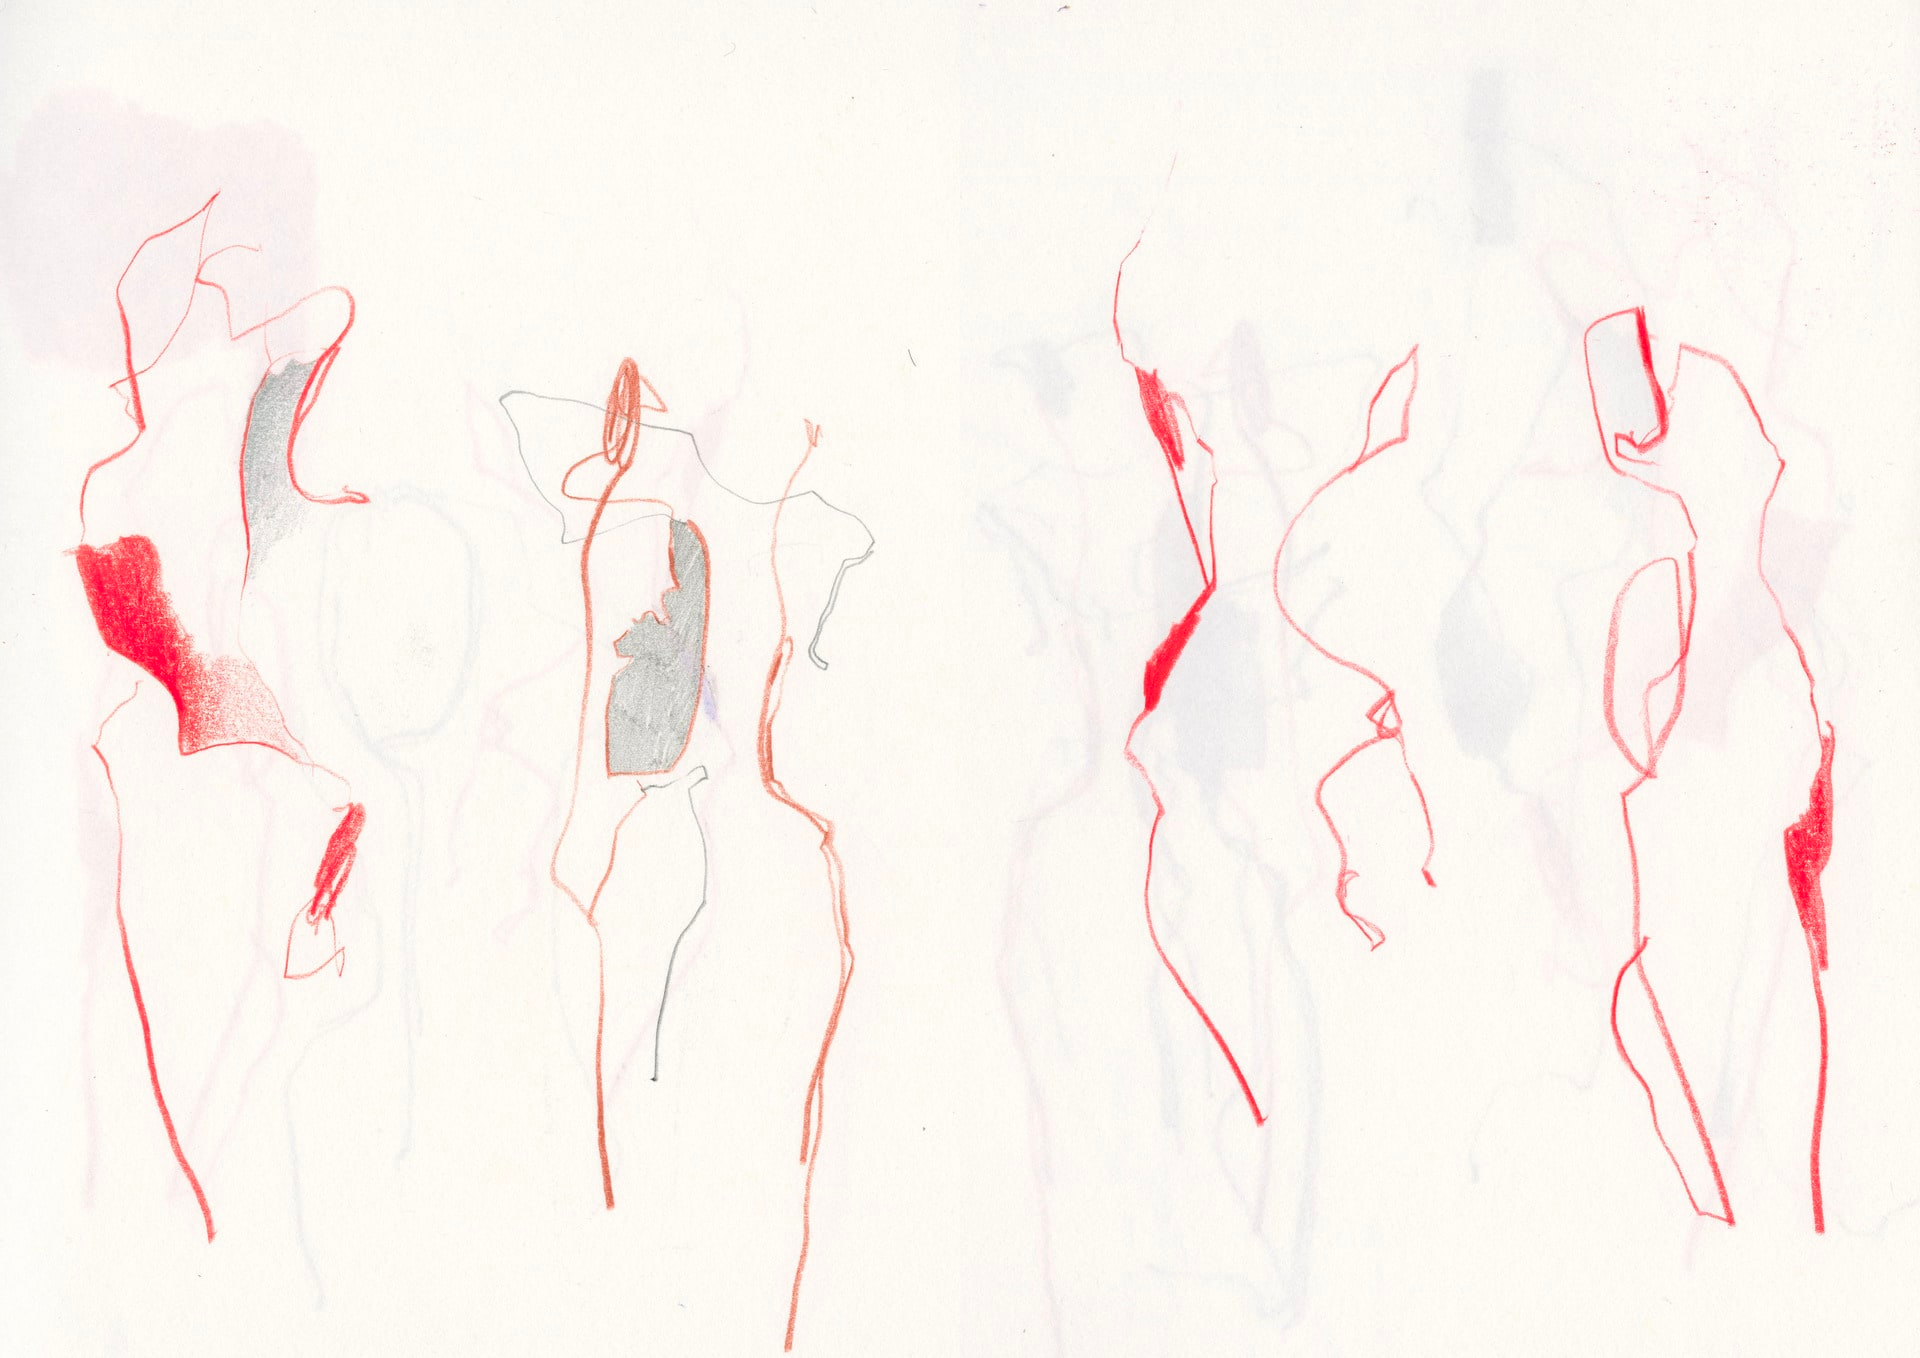 Abstract image of outlines in red on a cream background, possibly suggesting headless human figures in different poses.